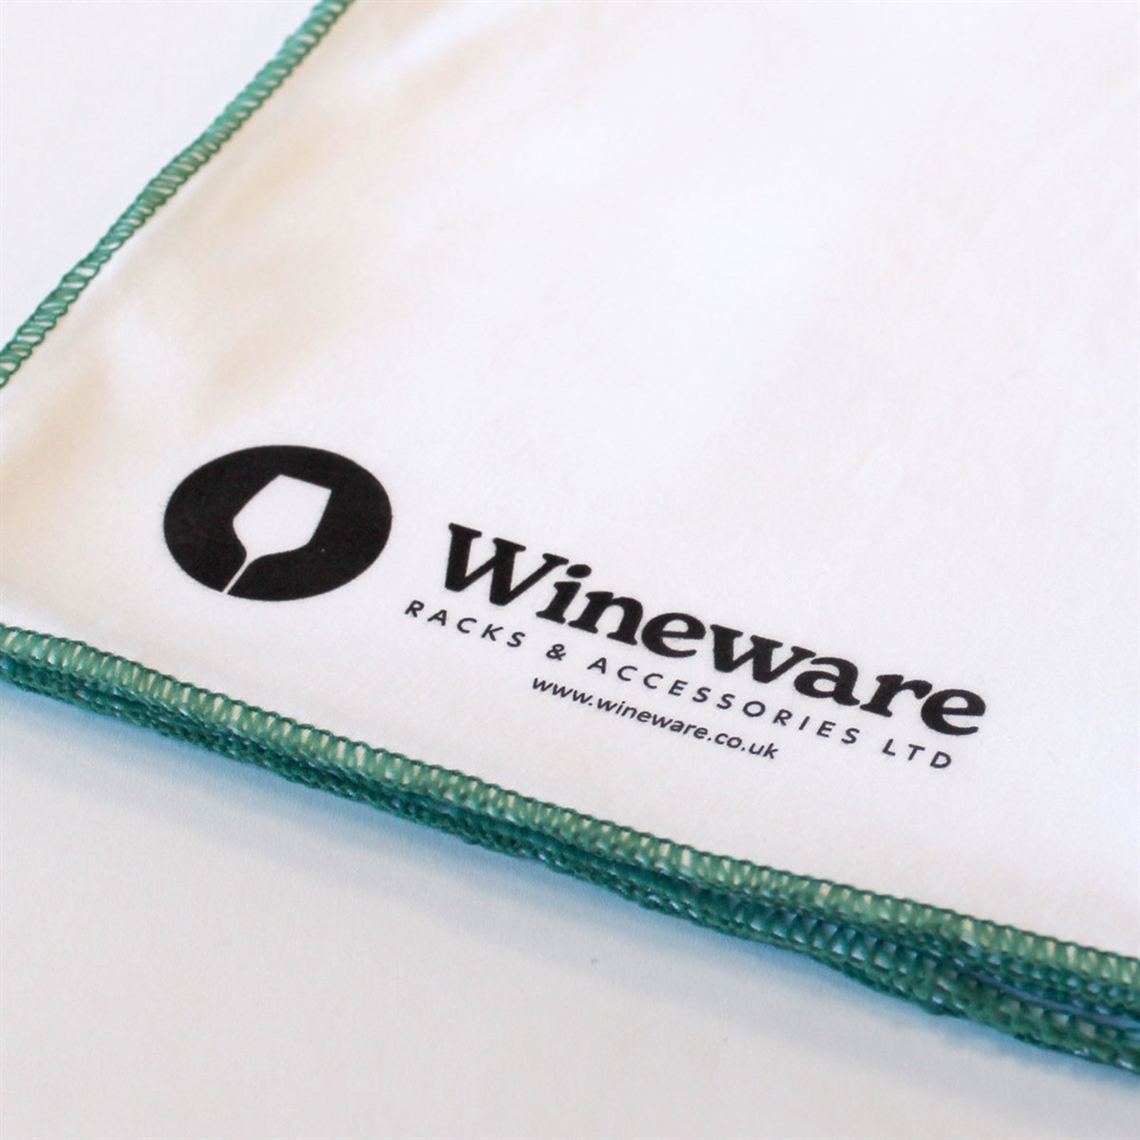 View more restaurant glasses - schott zwiesel from our Wine Glass Cleaning & Accessories range